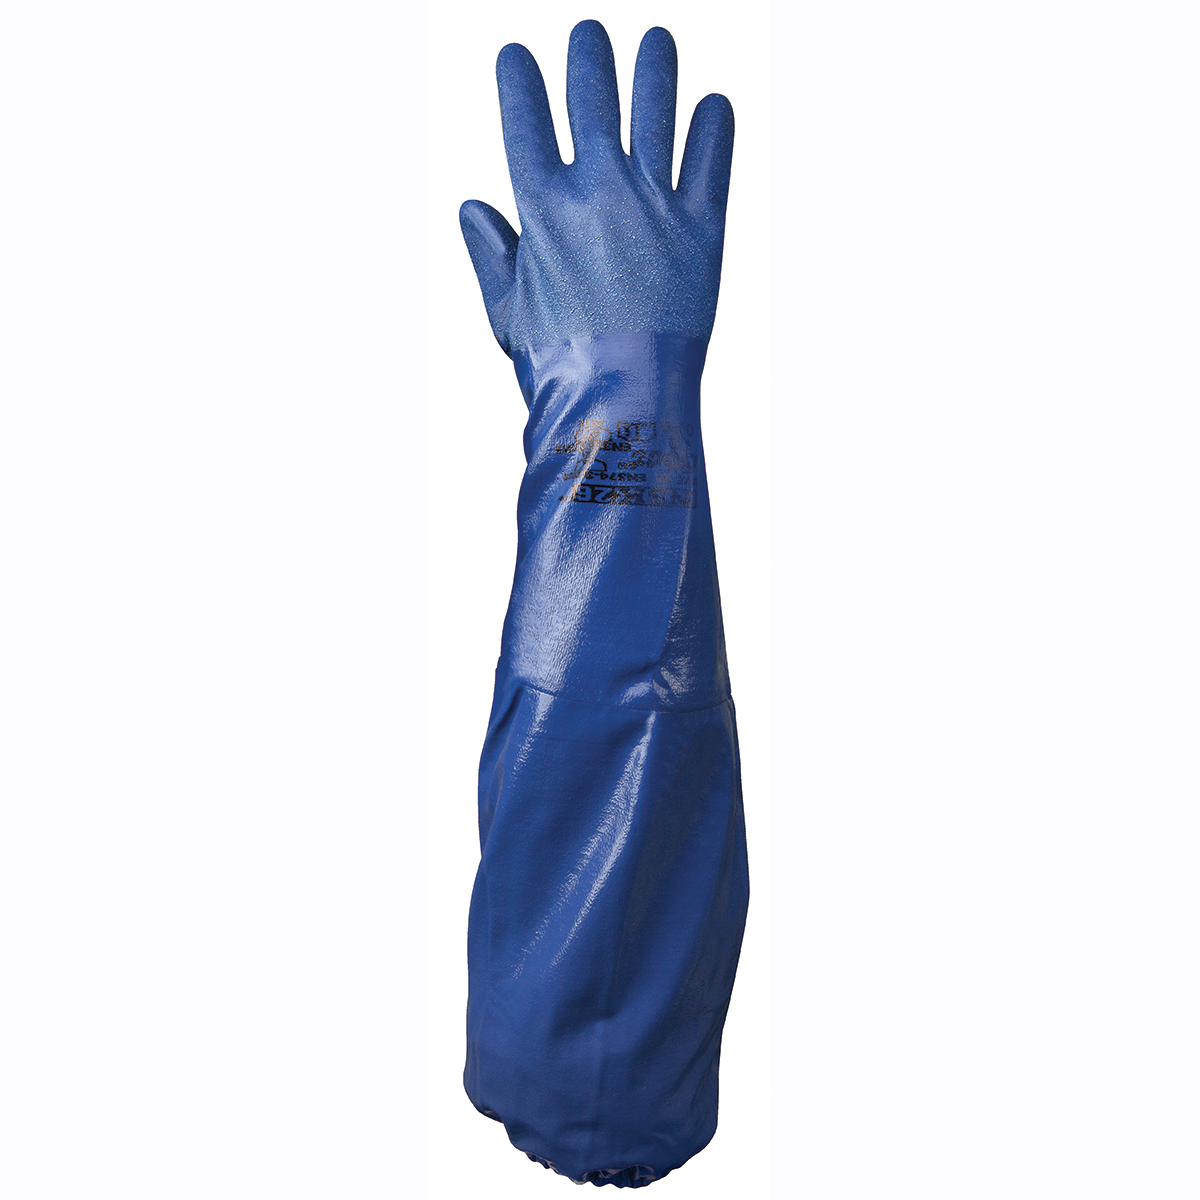 SHOWA® Size 9 Blue Cotton Lined Nitrile Chemical Resistant Gloves